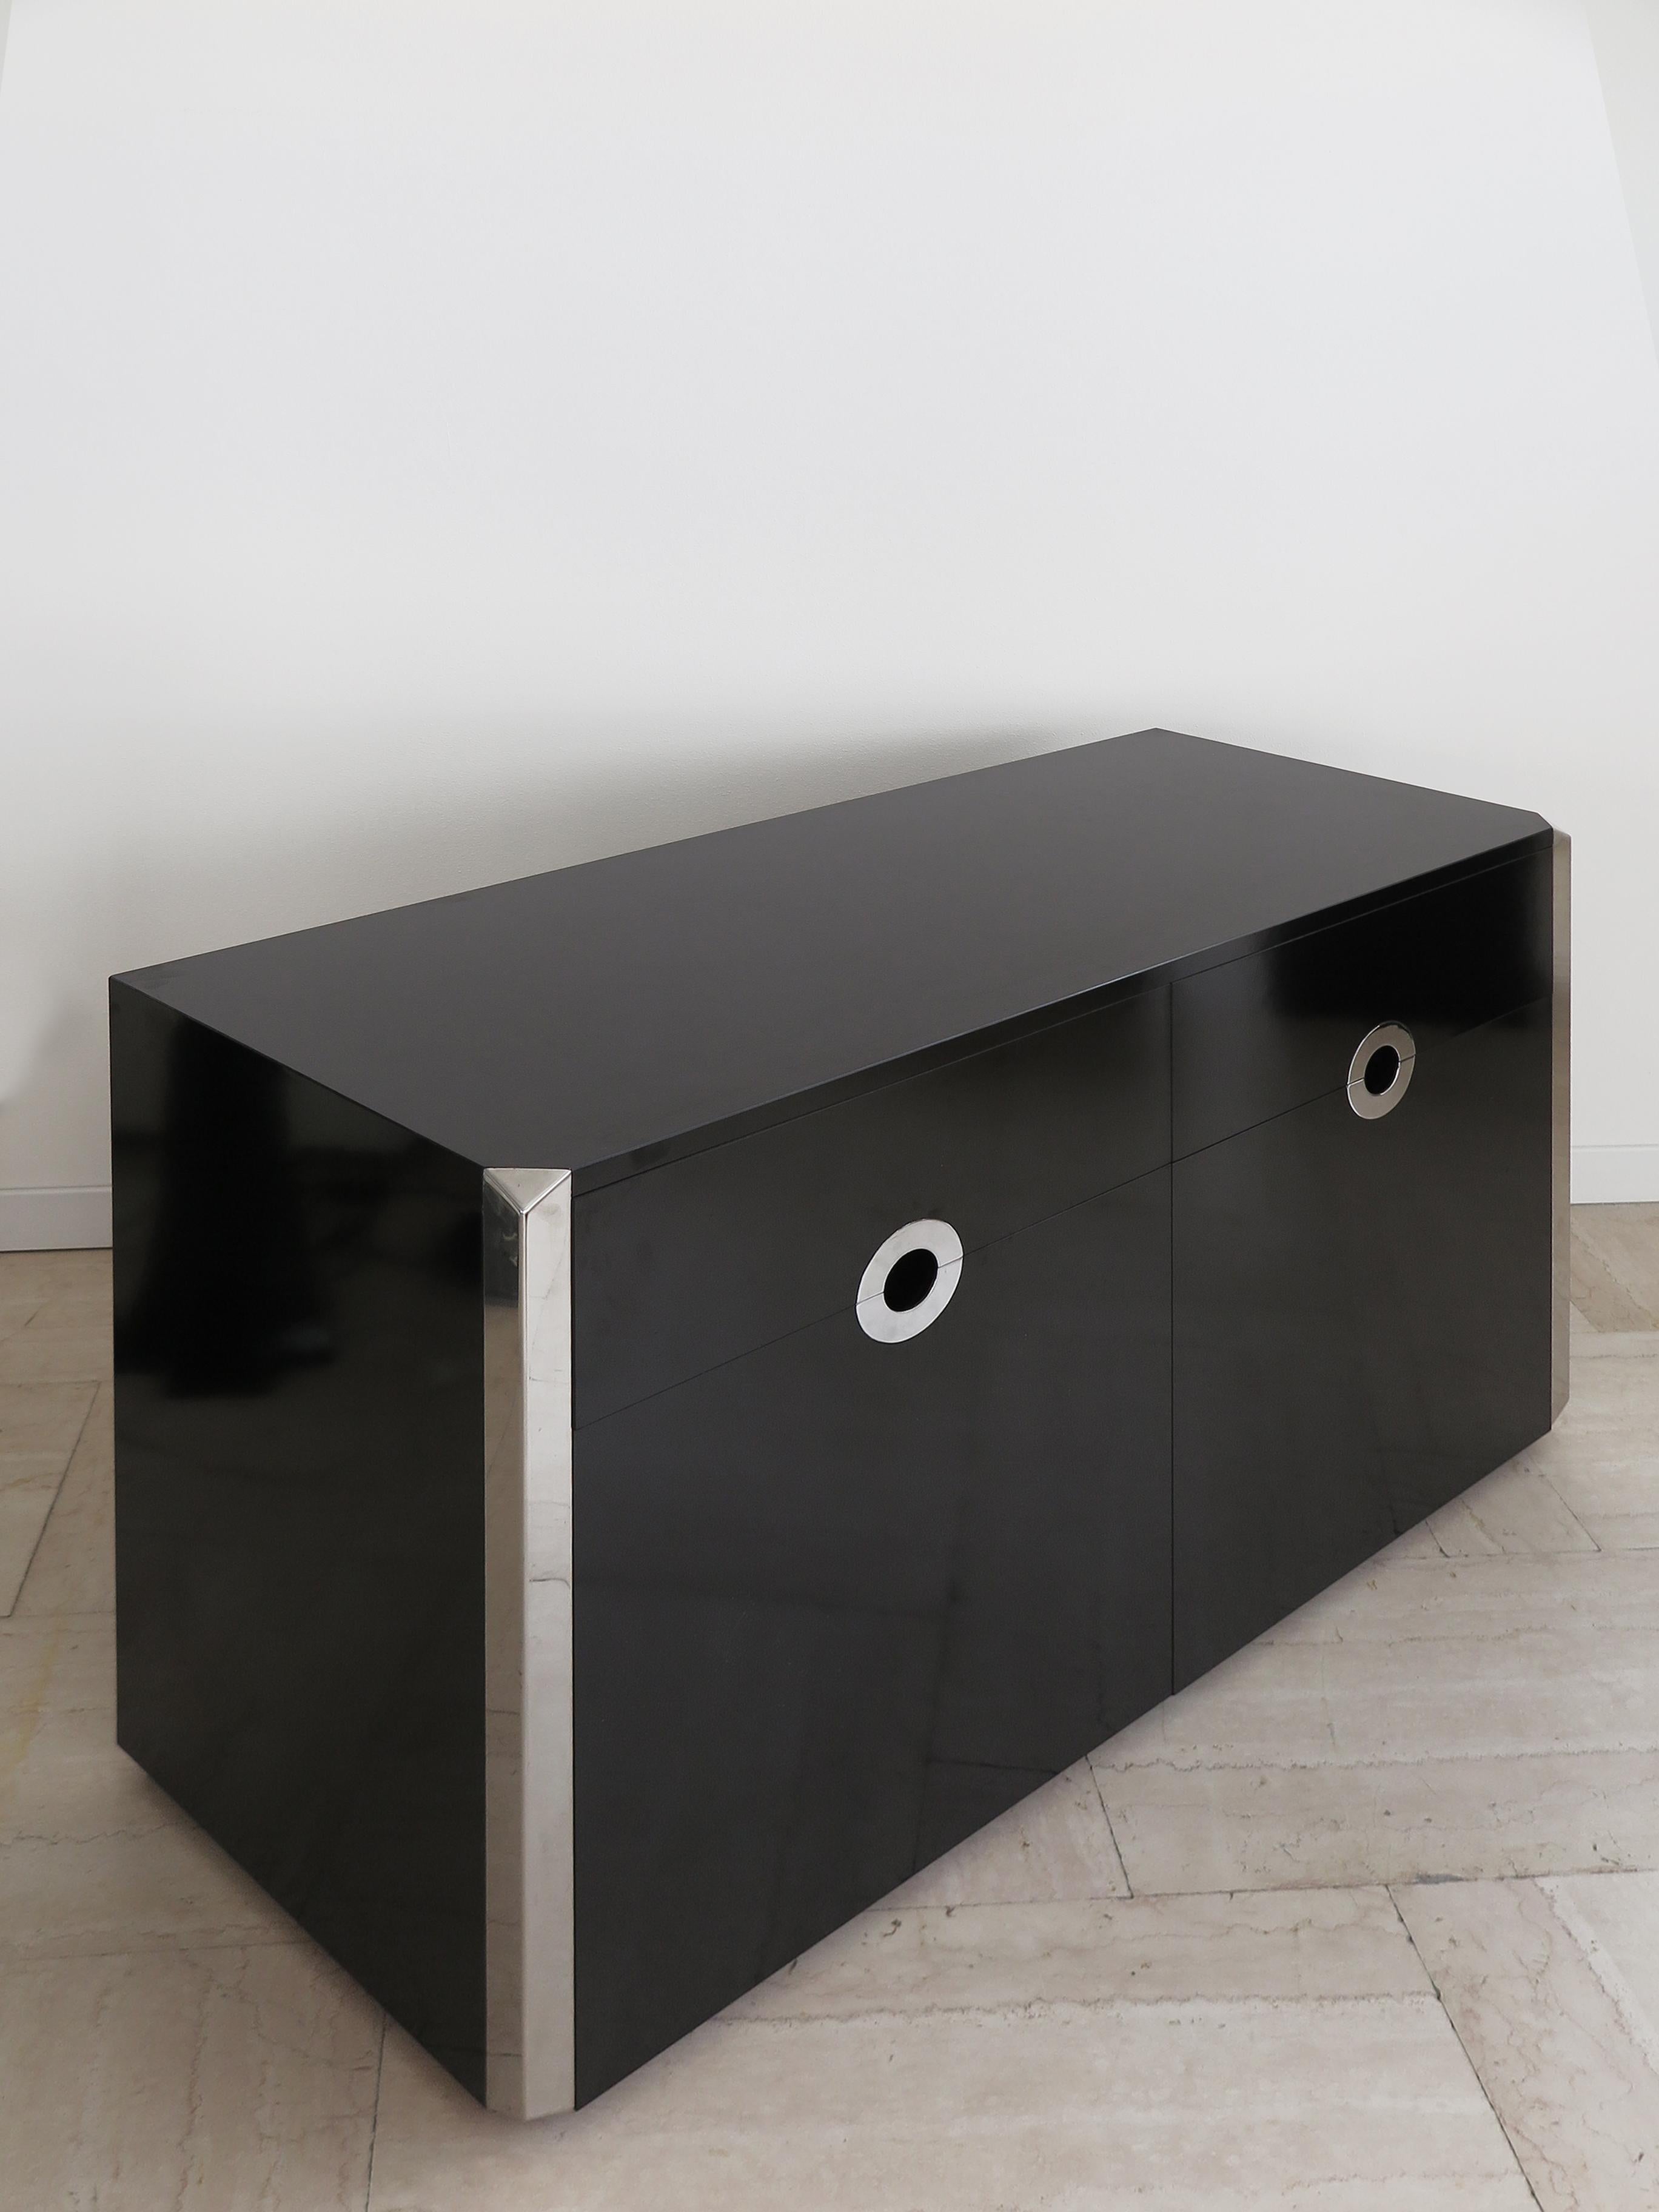 Sideboard credenza designed by Italian photographer and designer Willy Rizzo and manufactured by Mario Sabot with a wood frame covered in black laminate and steel details with two doors, two drawers and with with shelfes inside, 1970s

Please note